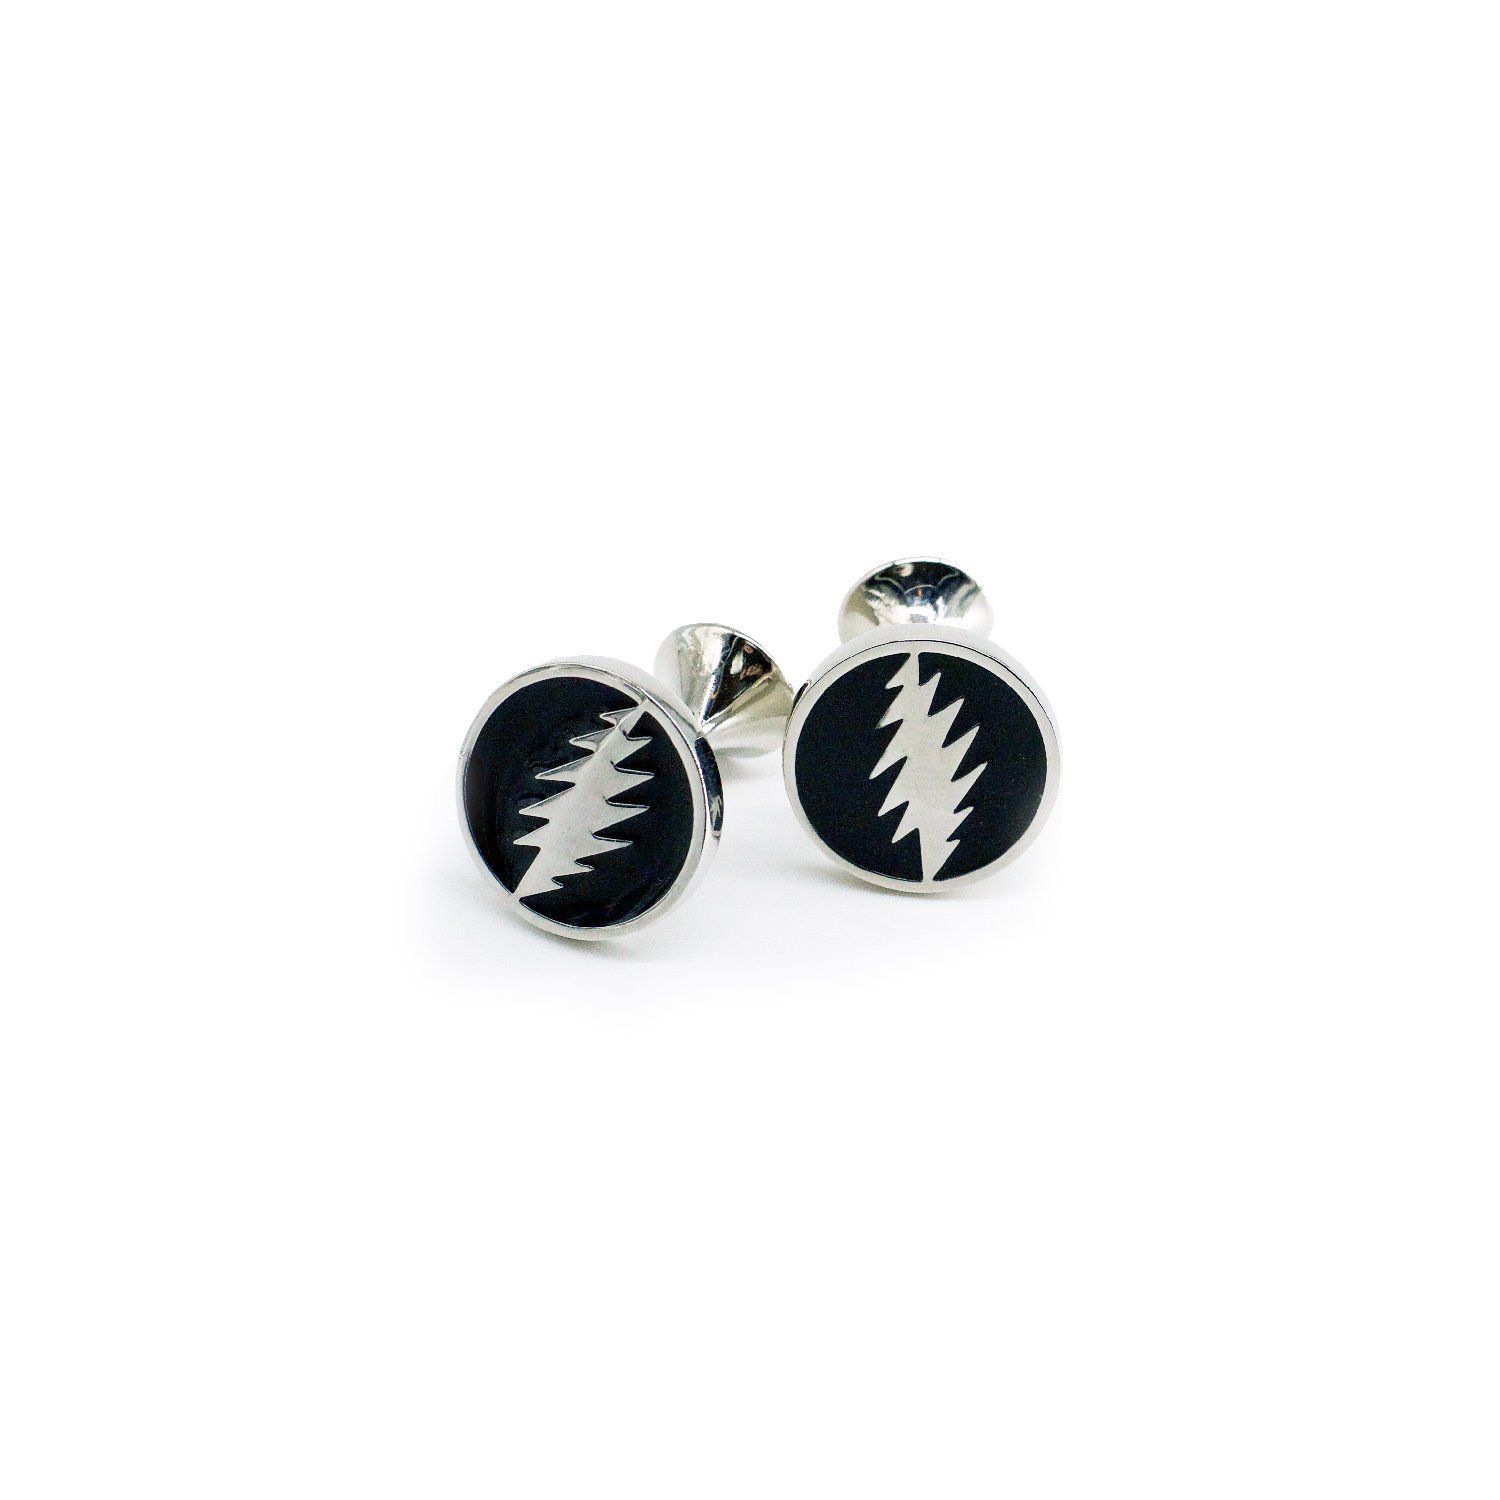 Grateful Dead Steal Your Face Sterling Silver Cufflinks